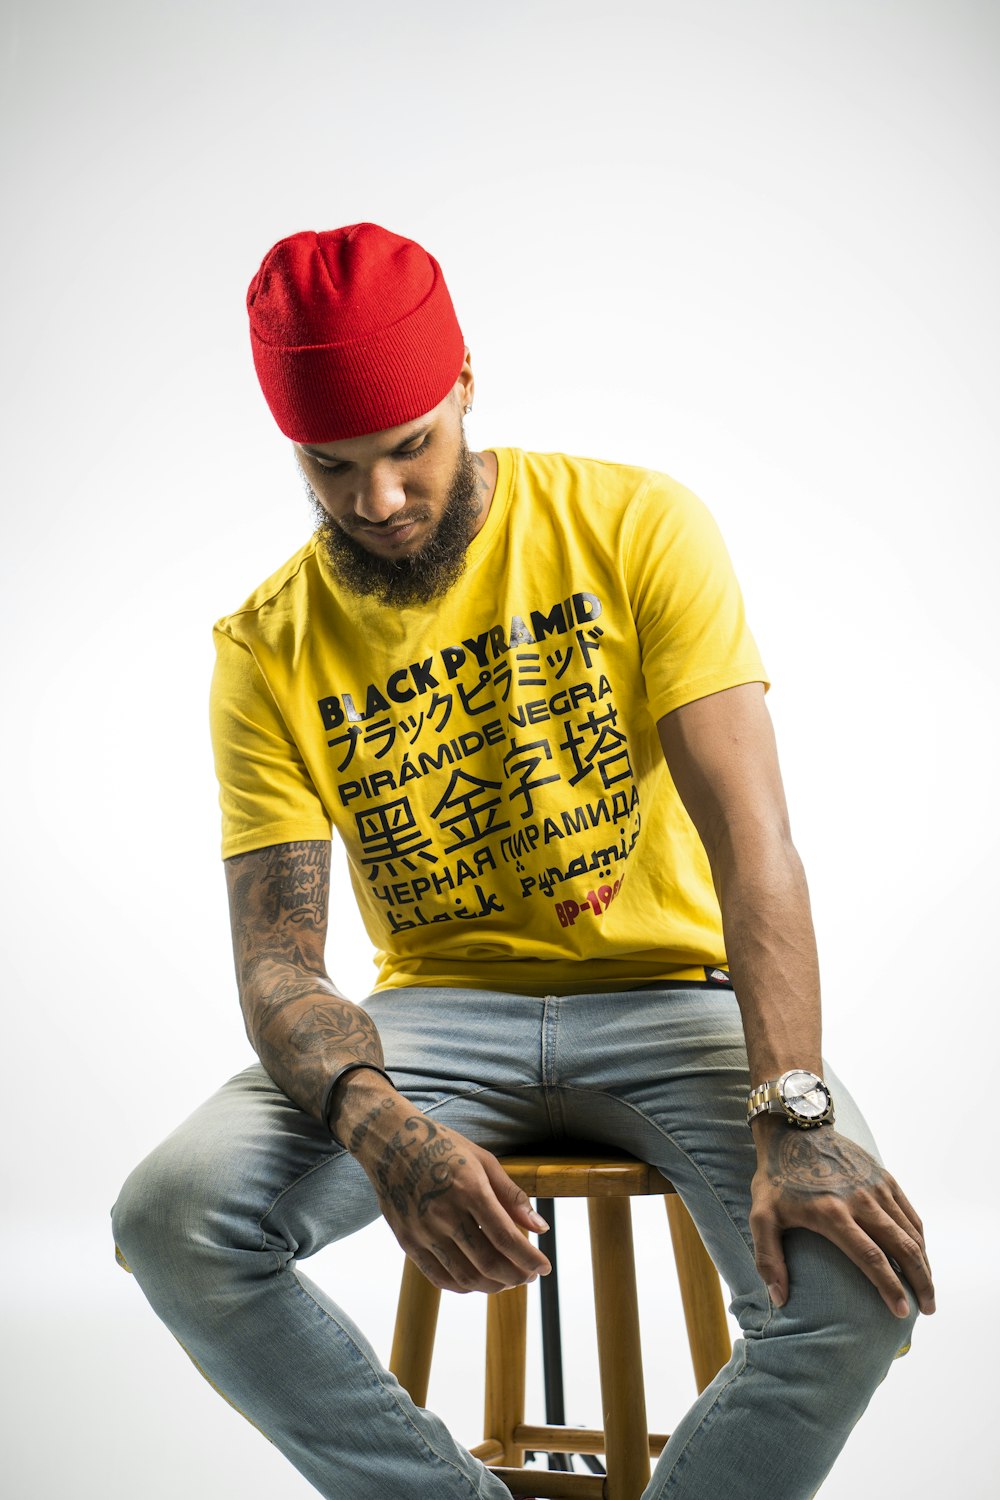 man wearing yellow and black printed crew-neck t-shirt and red knit cap sitting in wooden stool while looking down